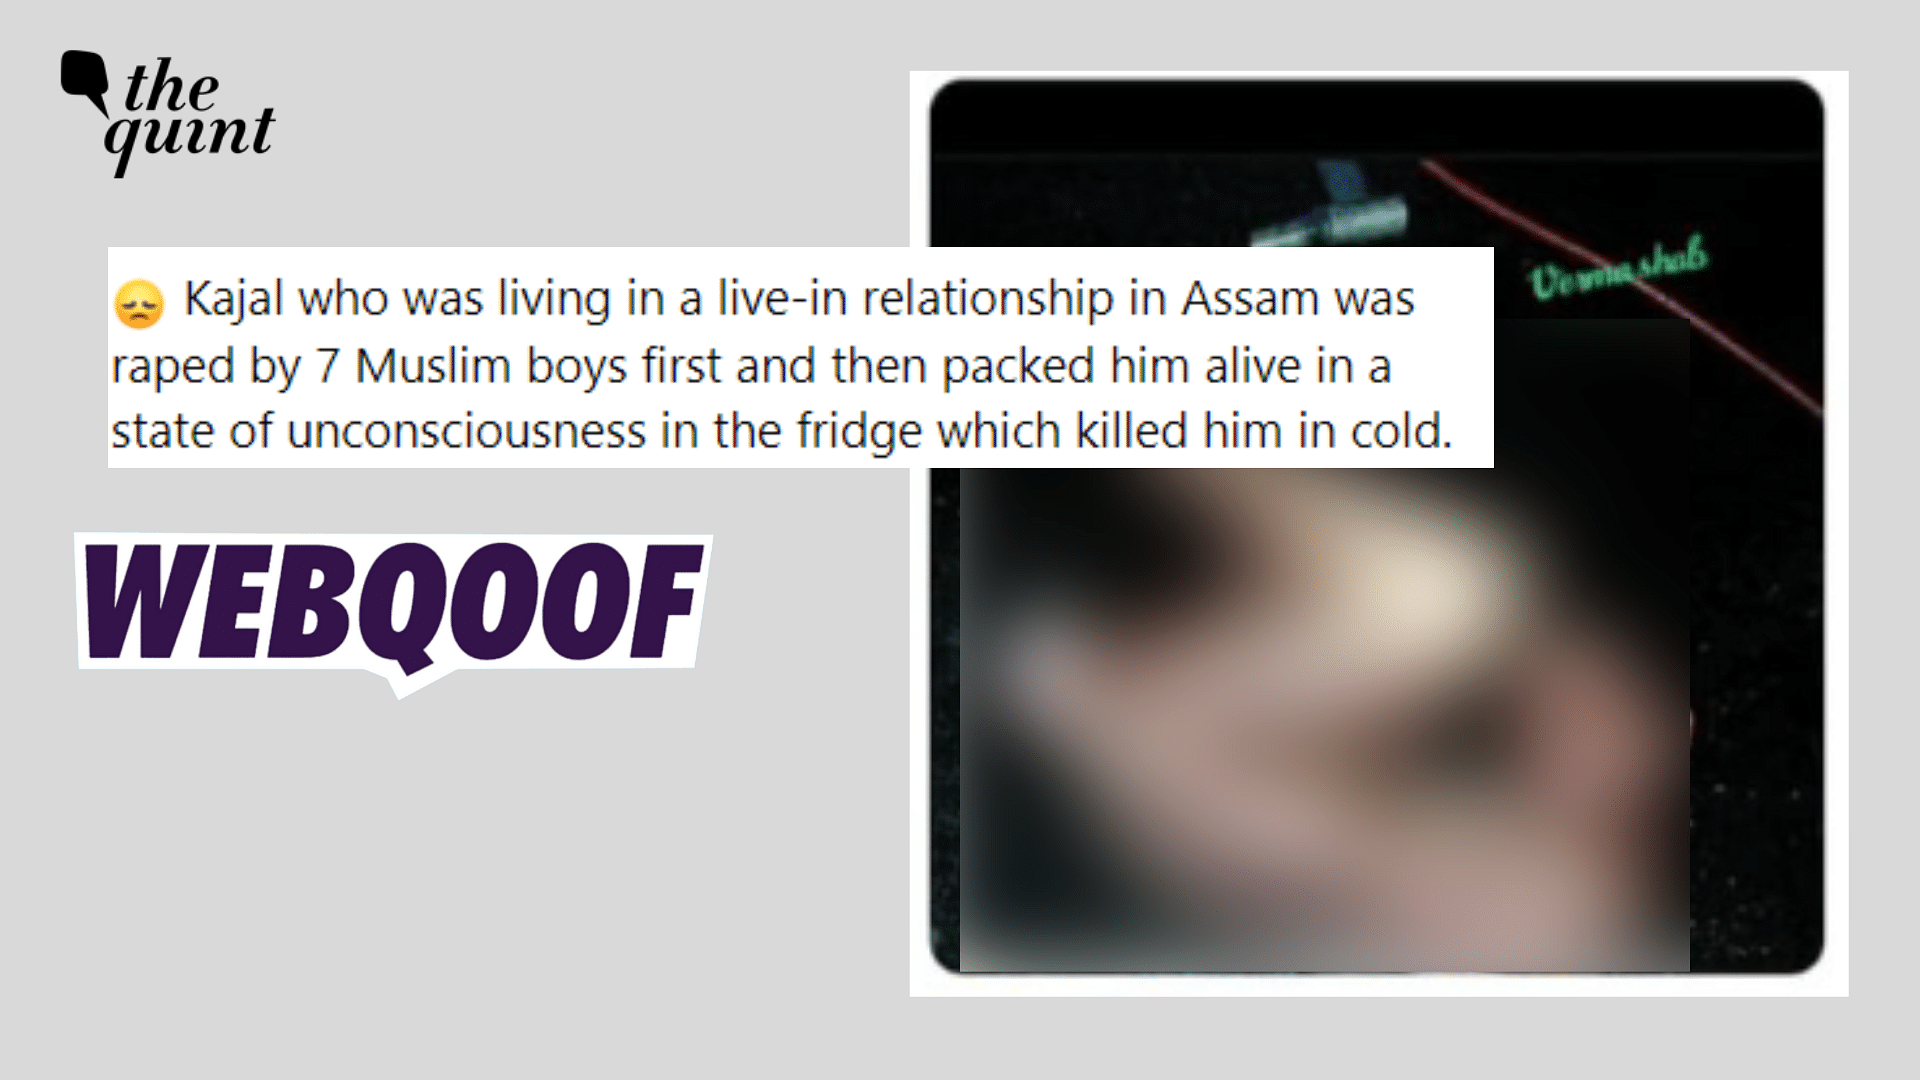 <div class="paragraphs"><p>Fact-check: Social media users fabricated a story about a rape and murder in Assam using old images from 2010.</p></div>